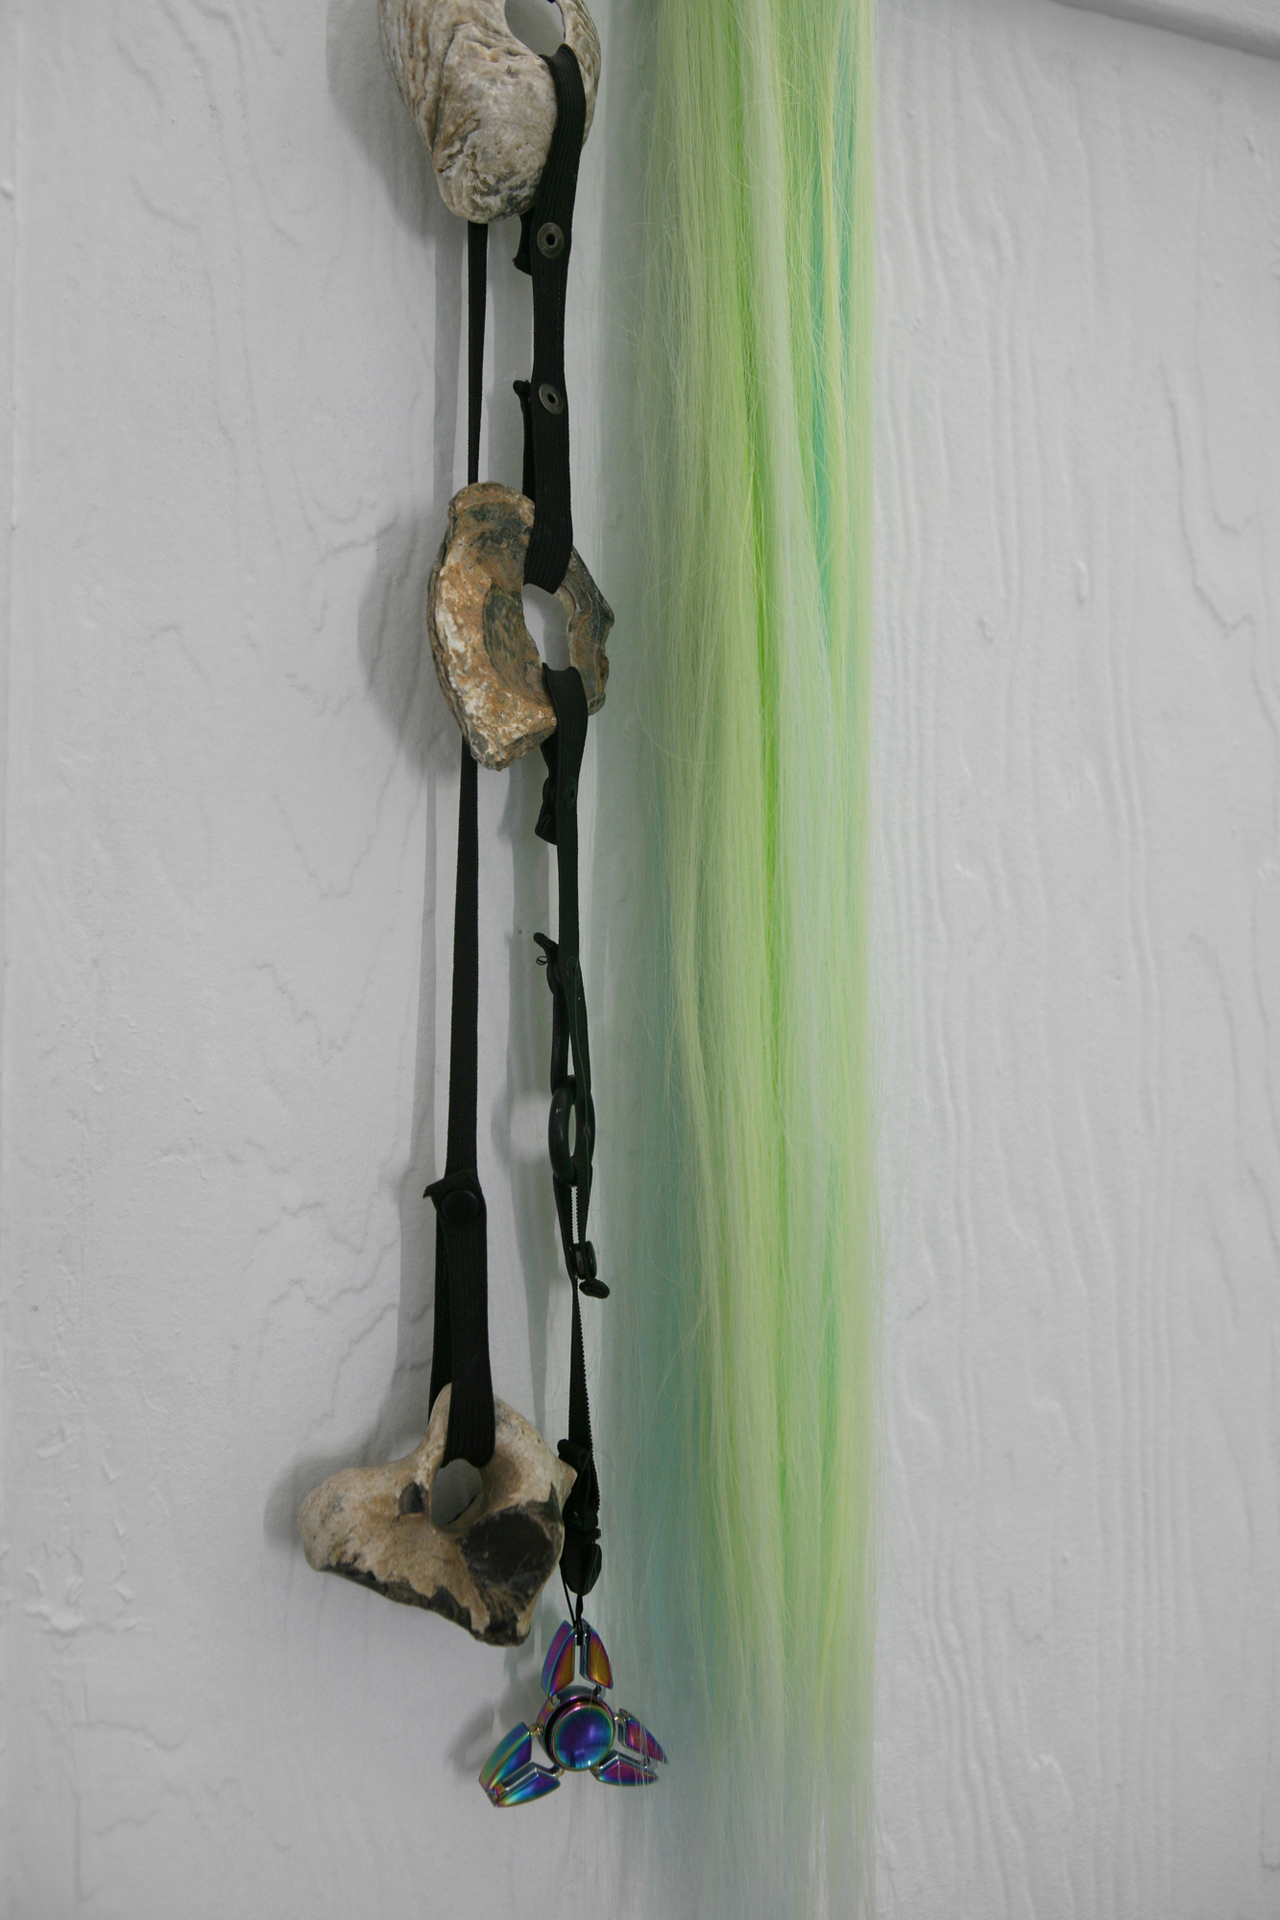 Rachel McRae, Ongoing reconfiguration of elements using a customizable system of elastic straps, athletic snaps and clips I, 2021, oyster shells mud-larked from the Thames with fidget spinners, hag-stones, and fluorescent hair-extensions, dimensions variable